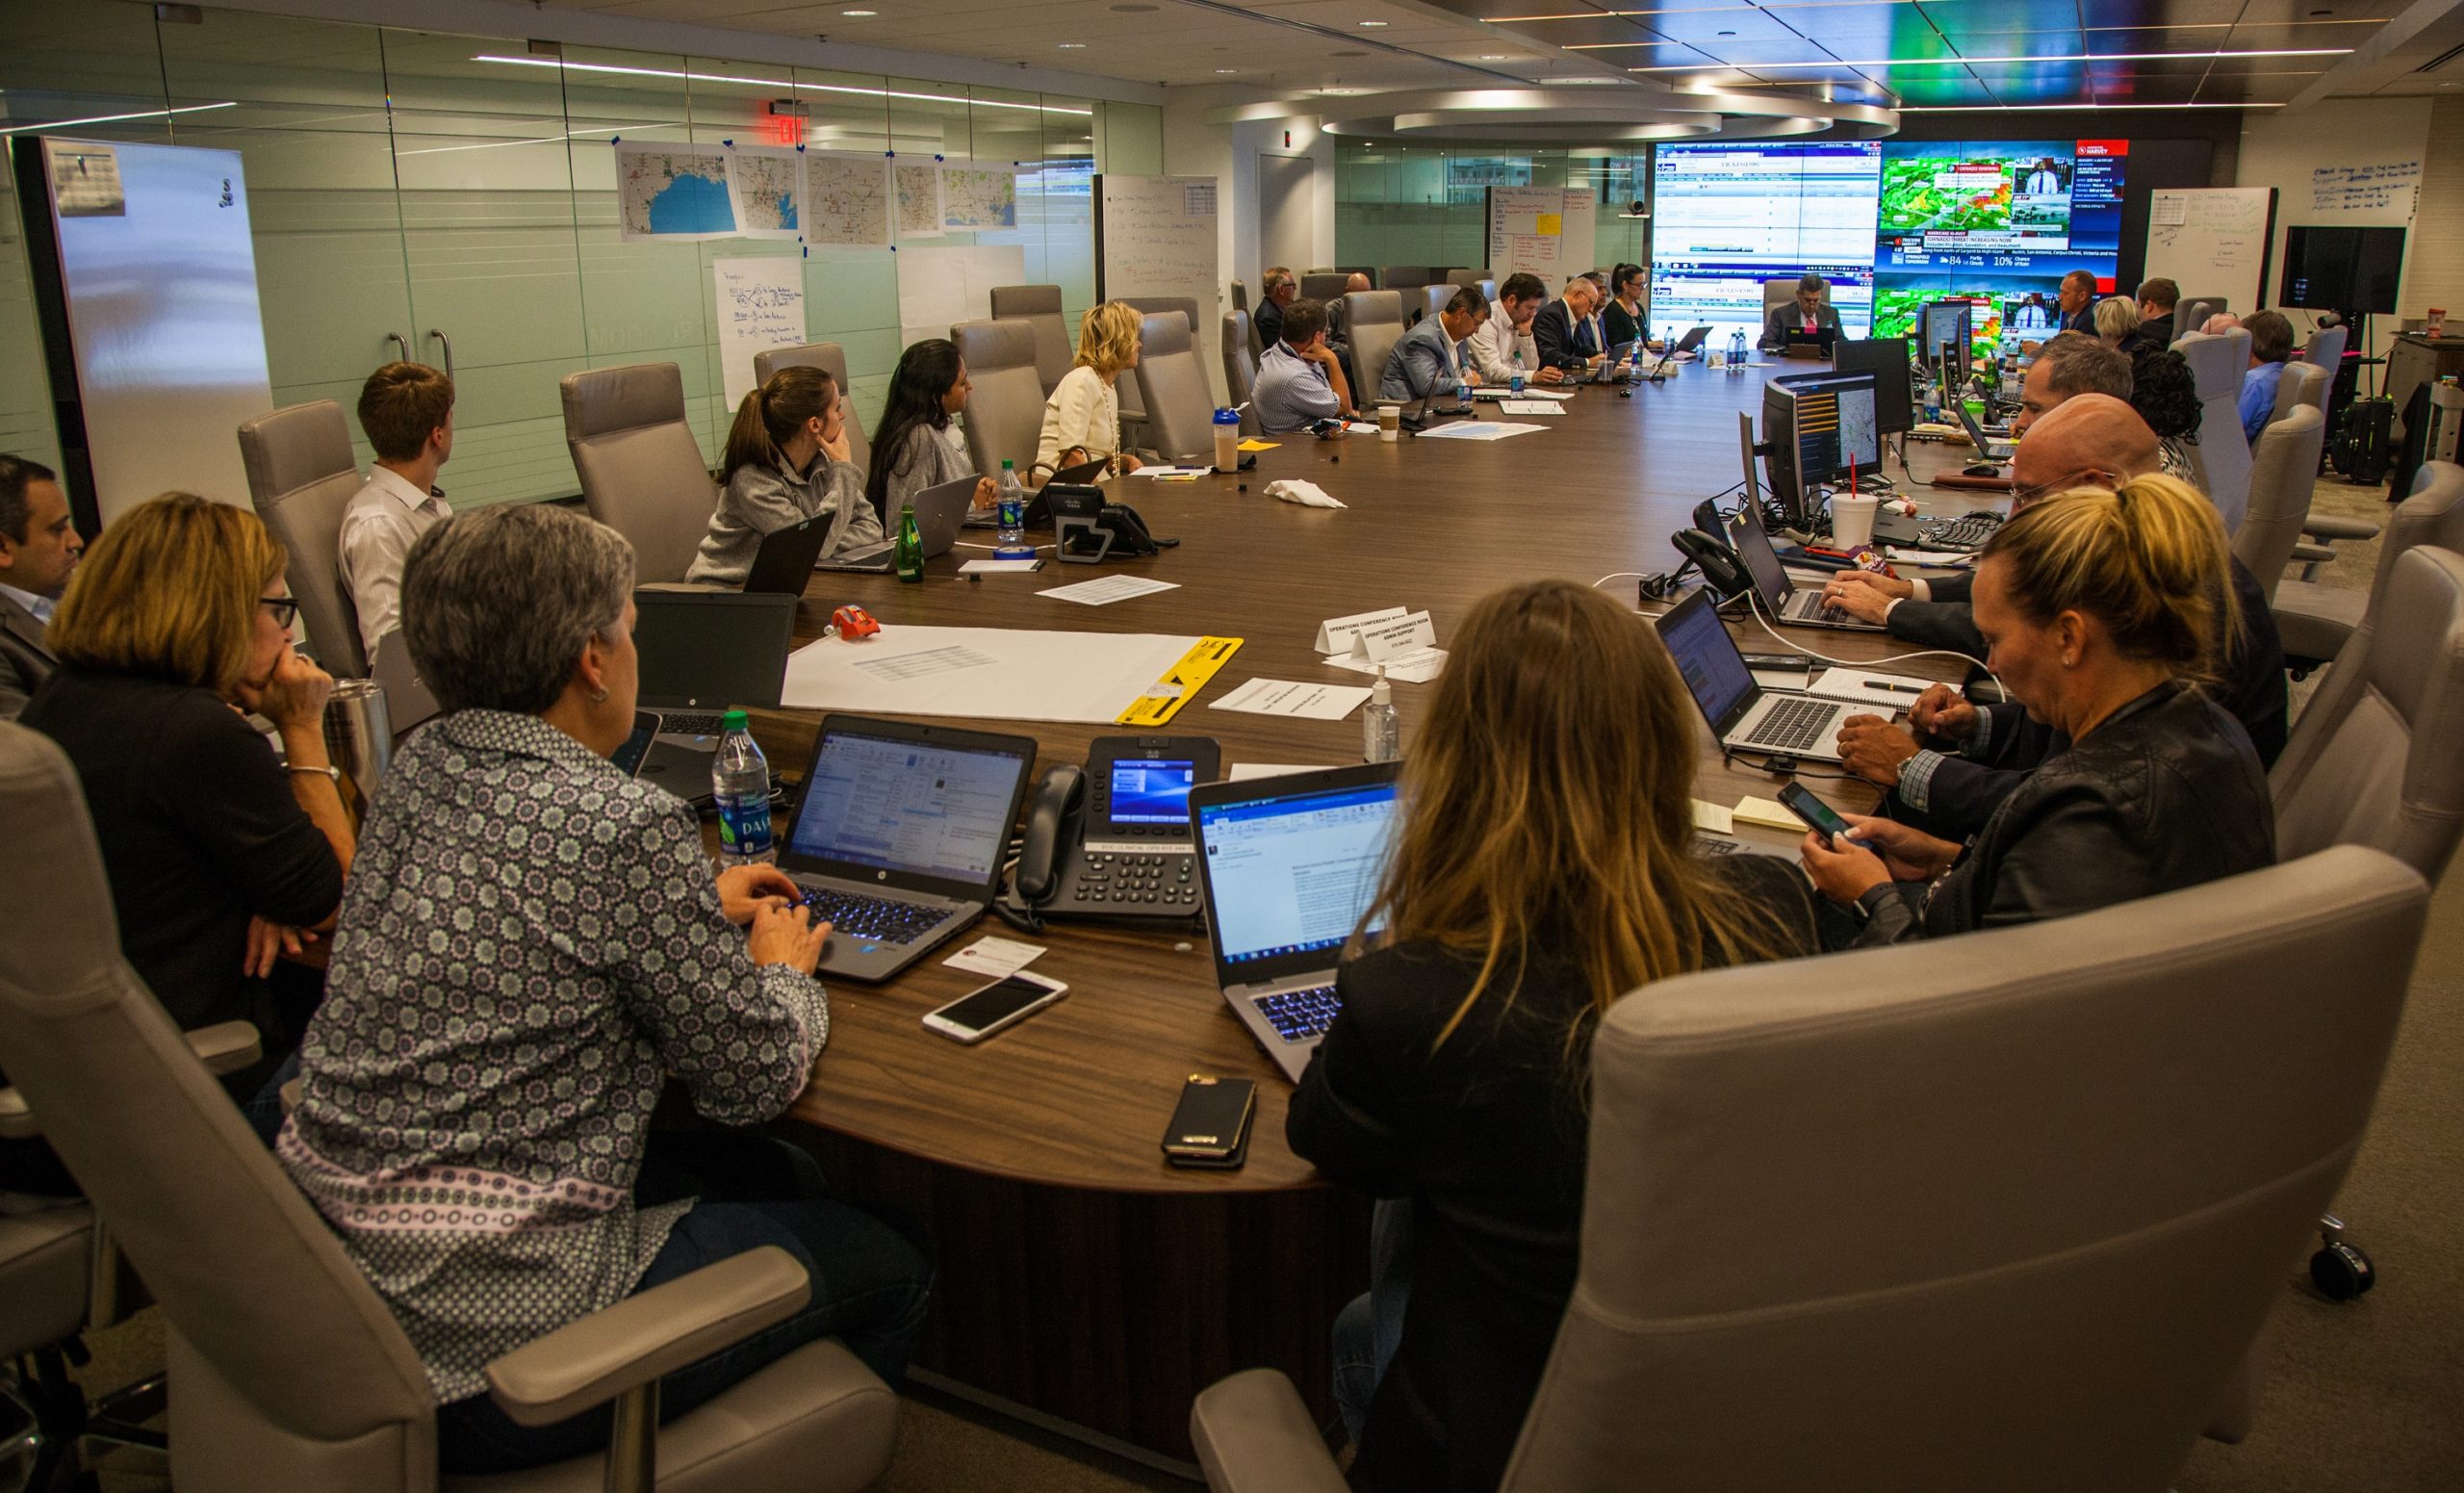 People sitting around large conference table looking at screens with hurricane information